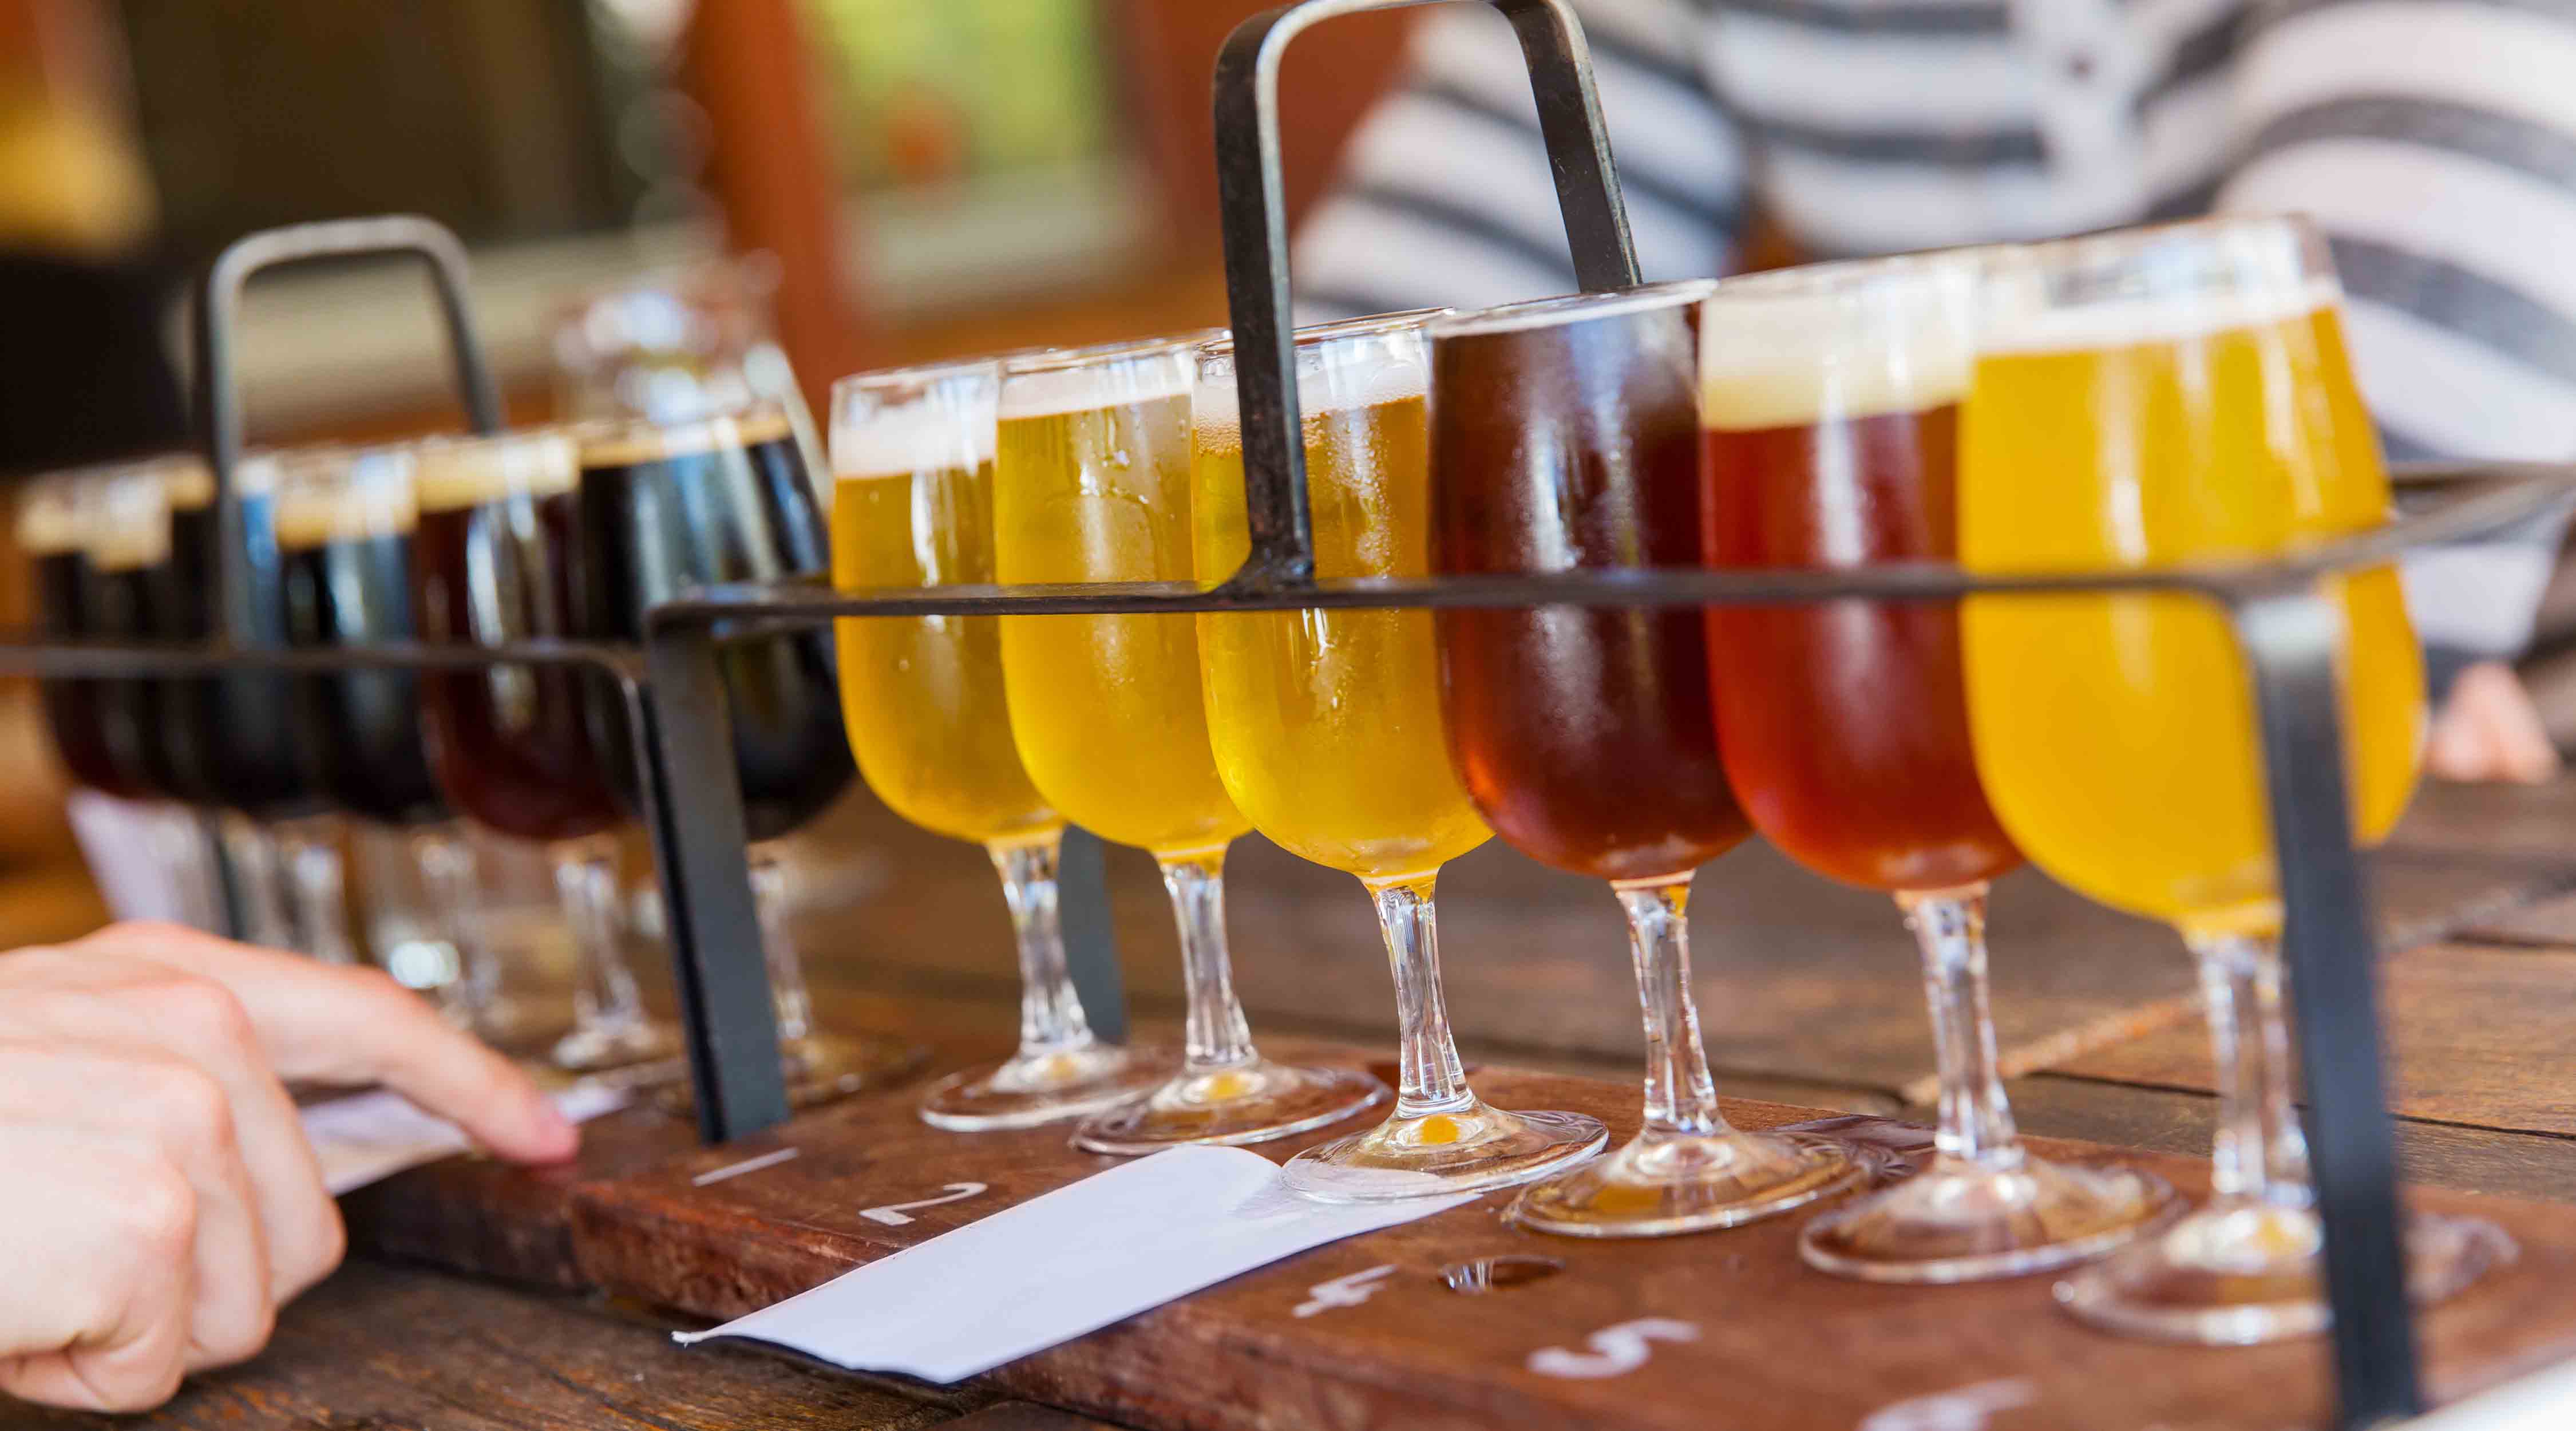 Although the US is recognised as the originator of the current craft beer movement and has heavily influenced the modern take on traditional styles, there are more craft breweries in Europe than North America.